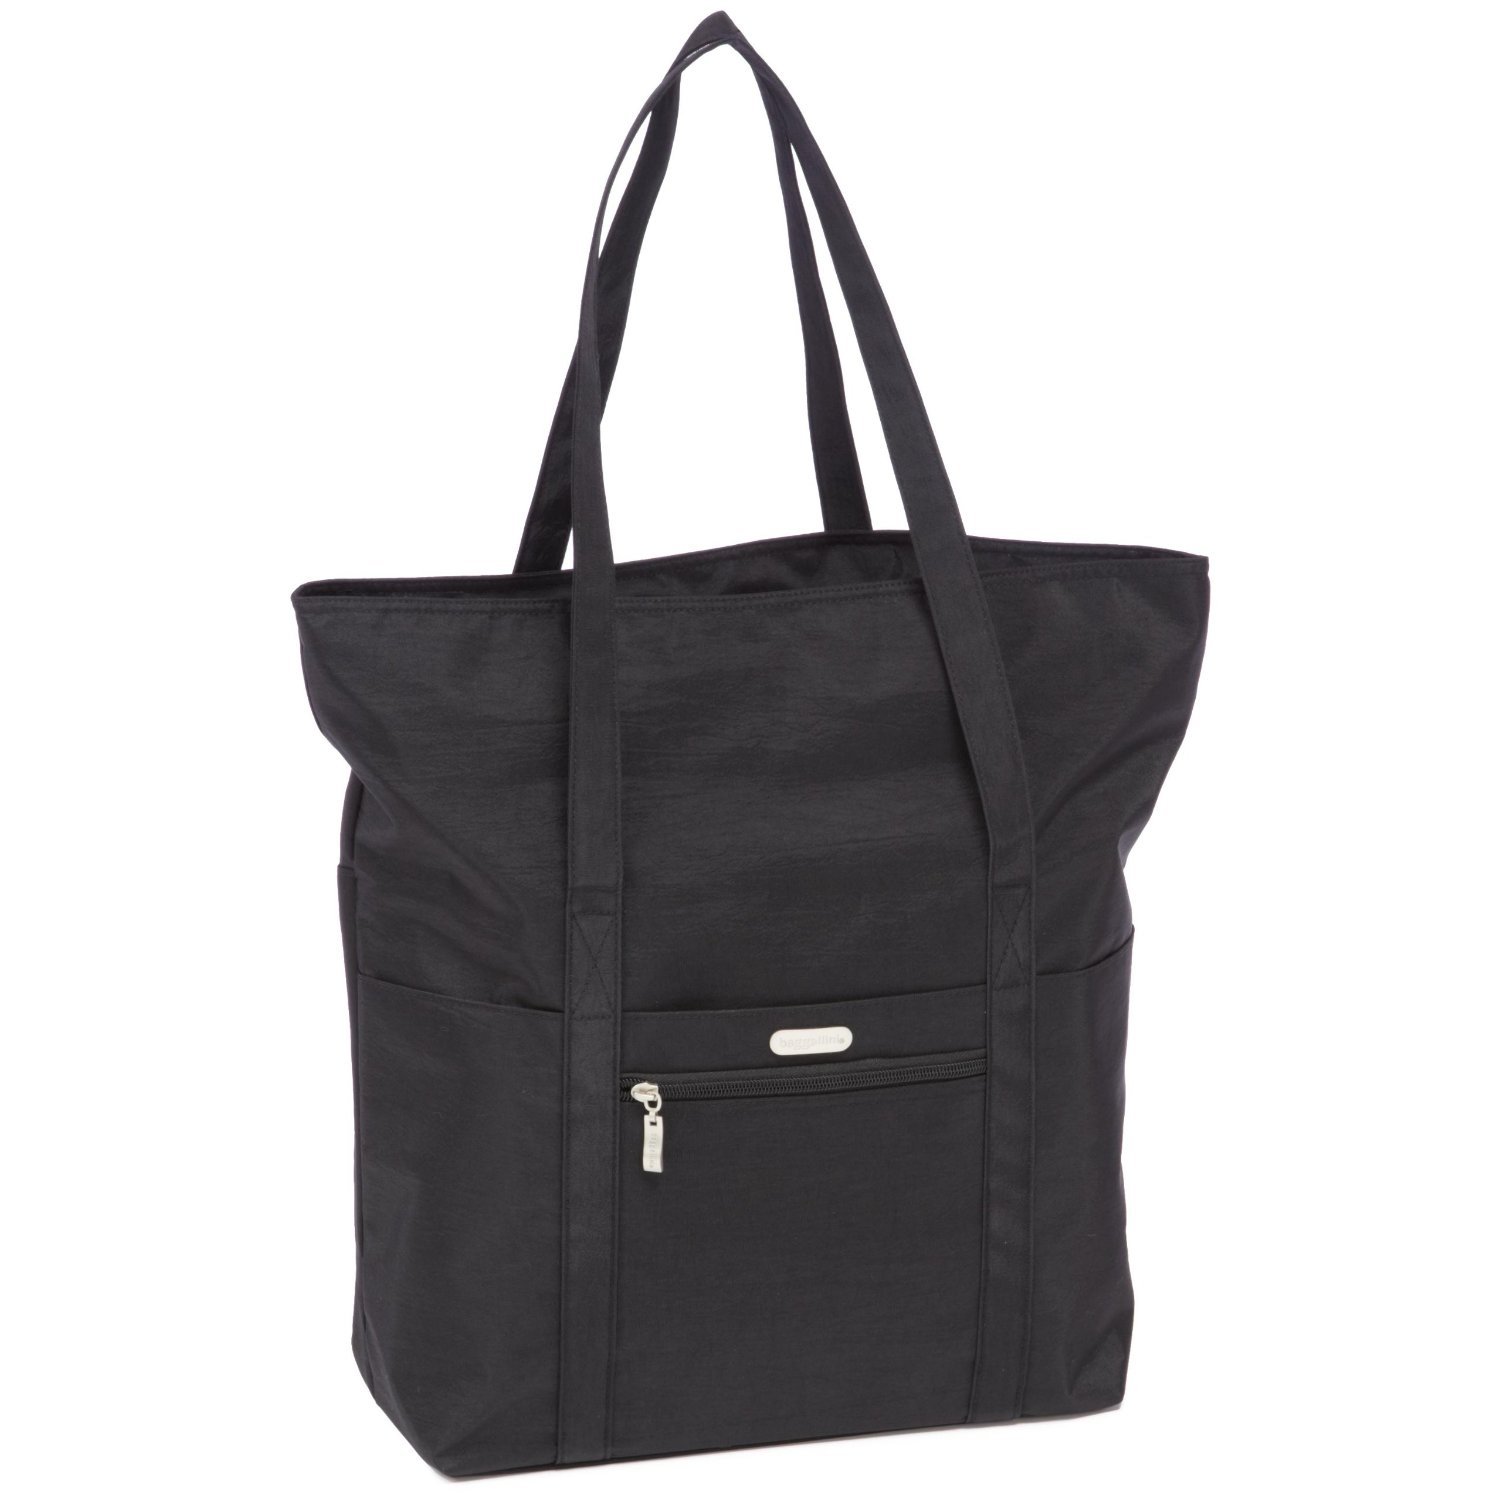 Baggallini Expandable Tote. Baggallini Women's Carryall Expandable ...